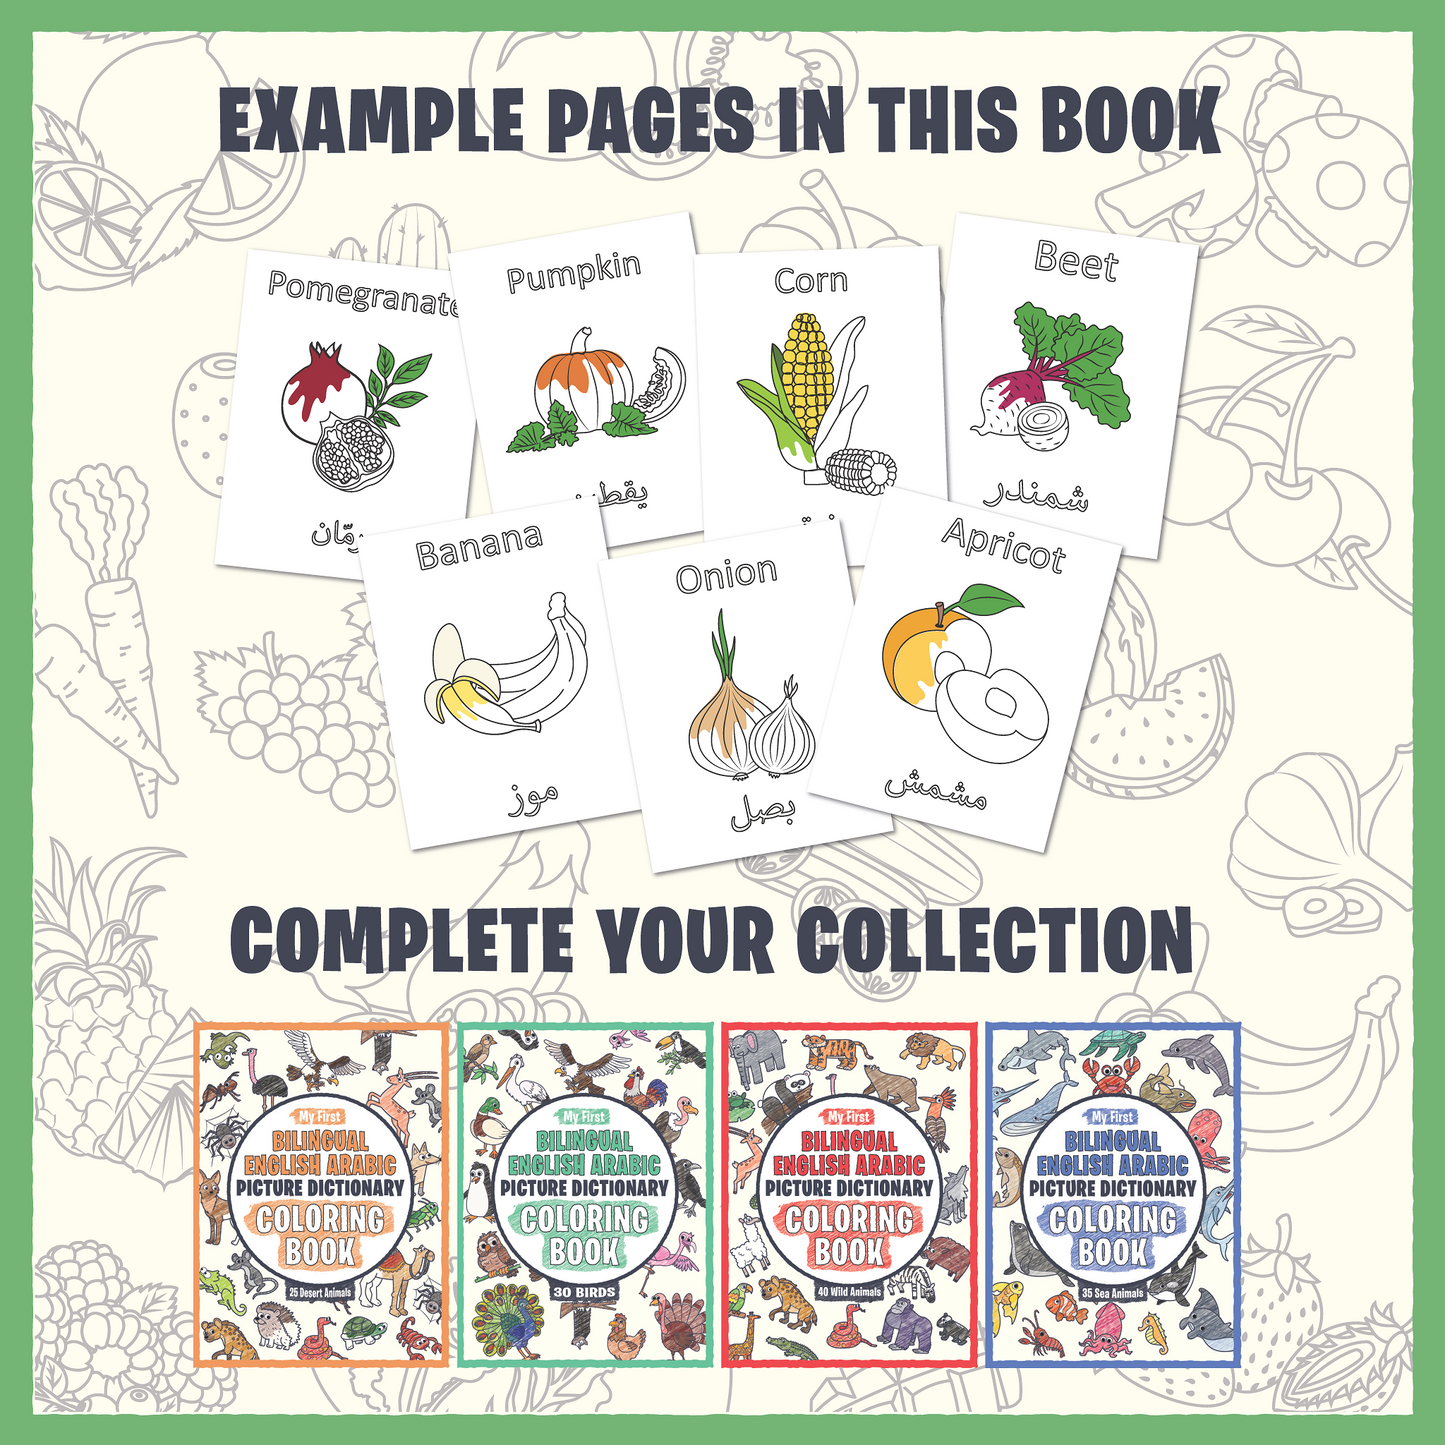 My First Bilingual English Arabic Picture Dictionary Coloring Book 35 Fruits and Vegetables: Simple, Easy-to-Color Large Drawings With Names, Cute Designs With Thick Black Outlines - Perfect for Toddlers Ages 1+